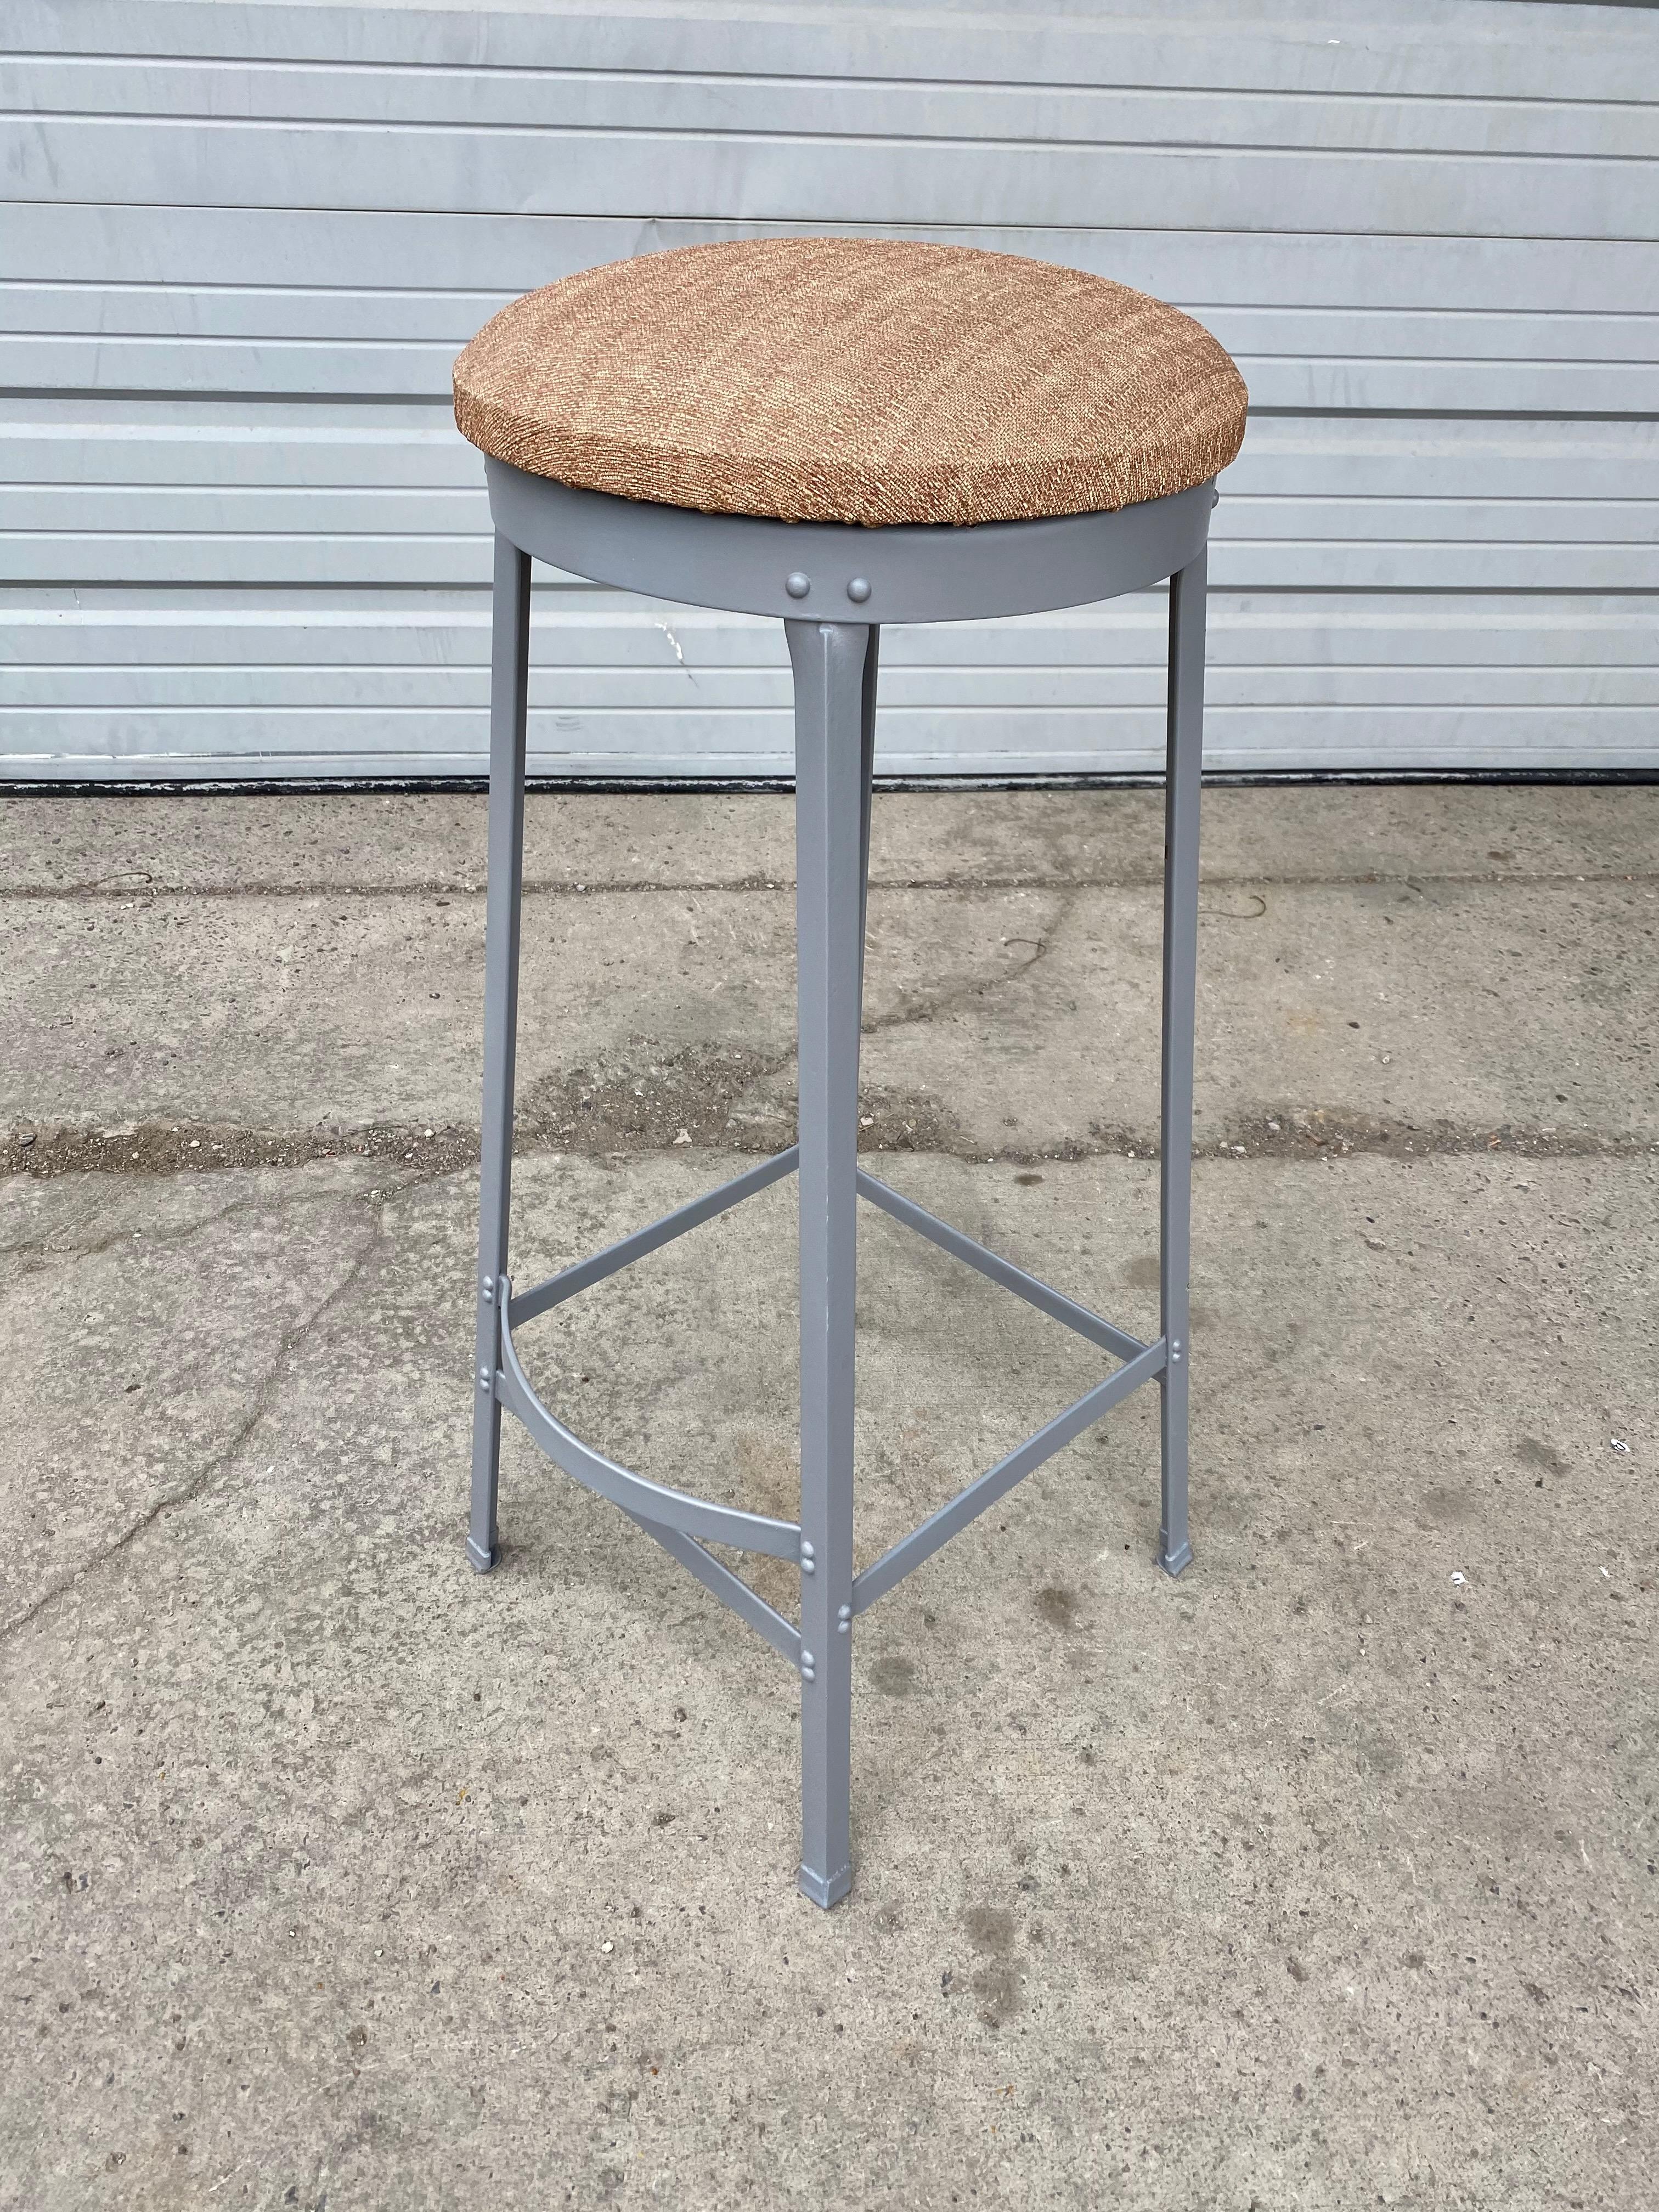 A handsome set of 6 vintage American Industrial iron bar stools with foot rests, bent-stock feet, attributed to Toledo metal furniture, metal recently restored, painted, appears to be original upholstered seats. Hand delivery avail to New York City